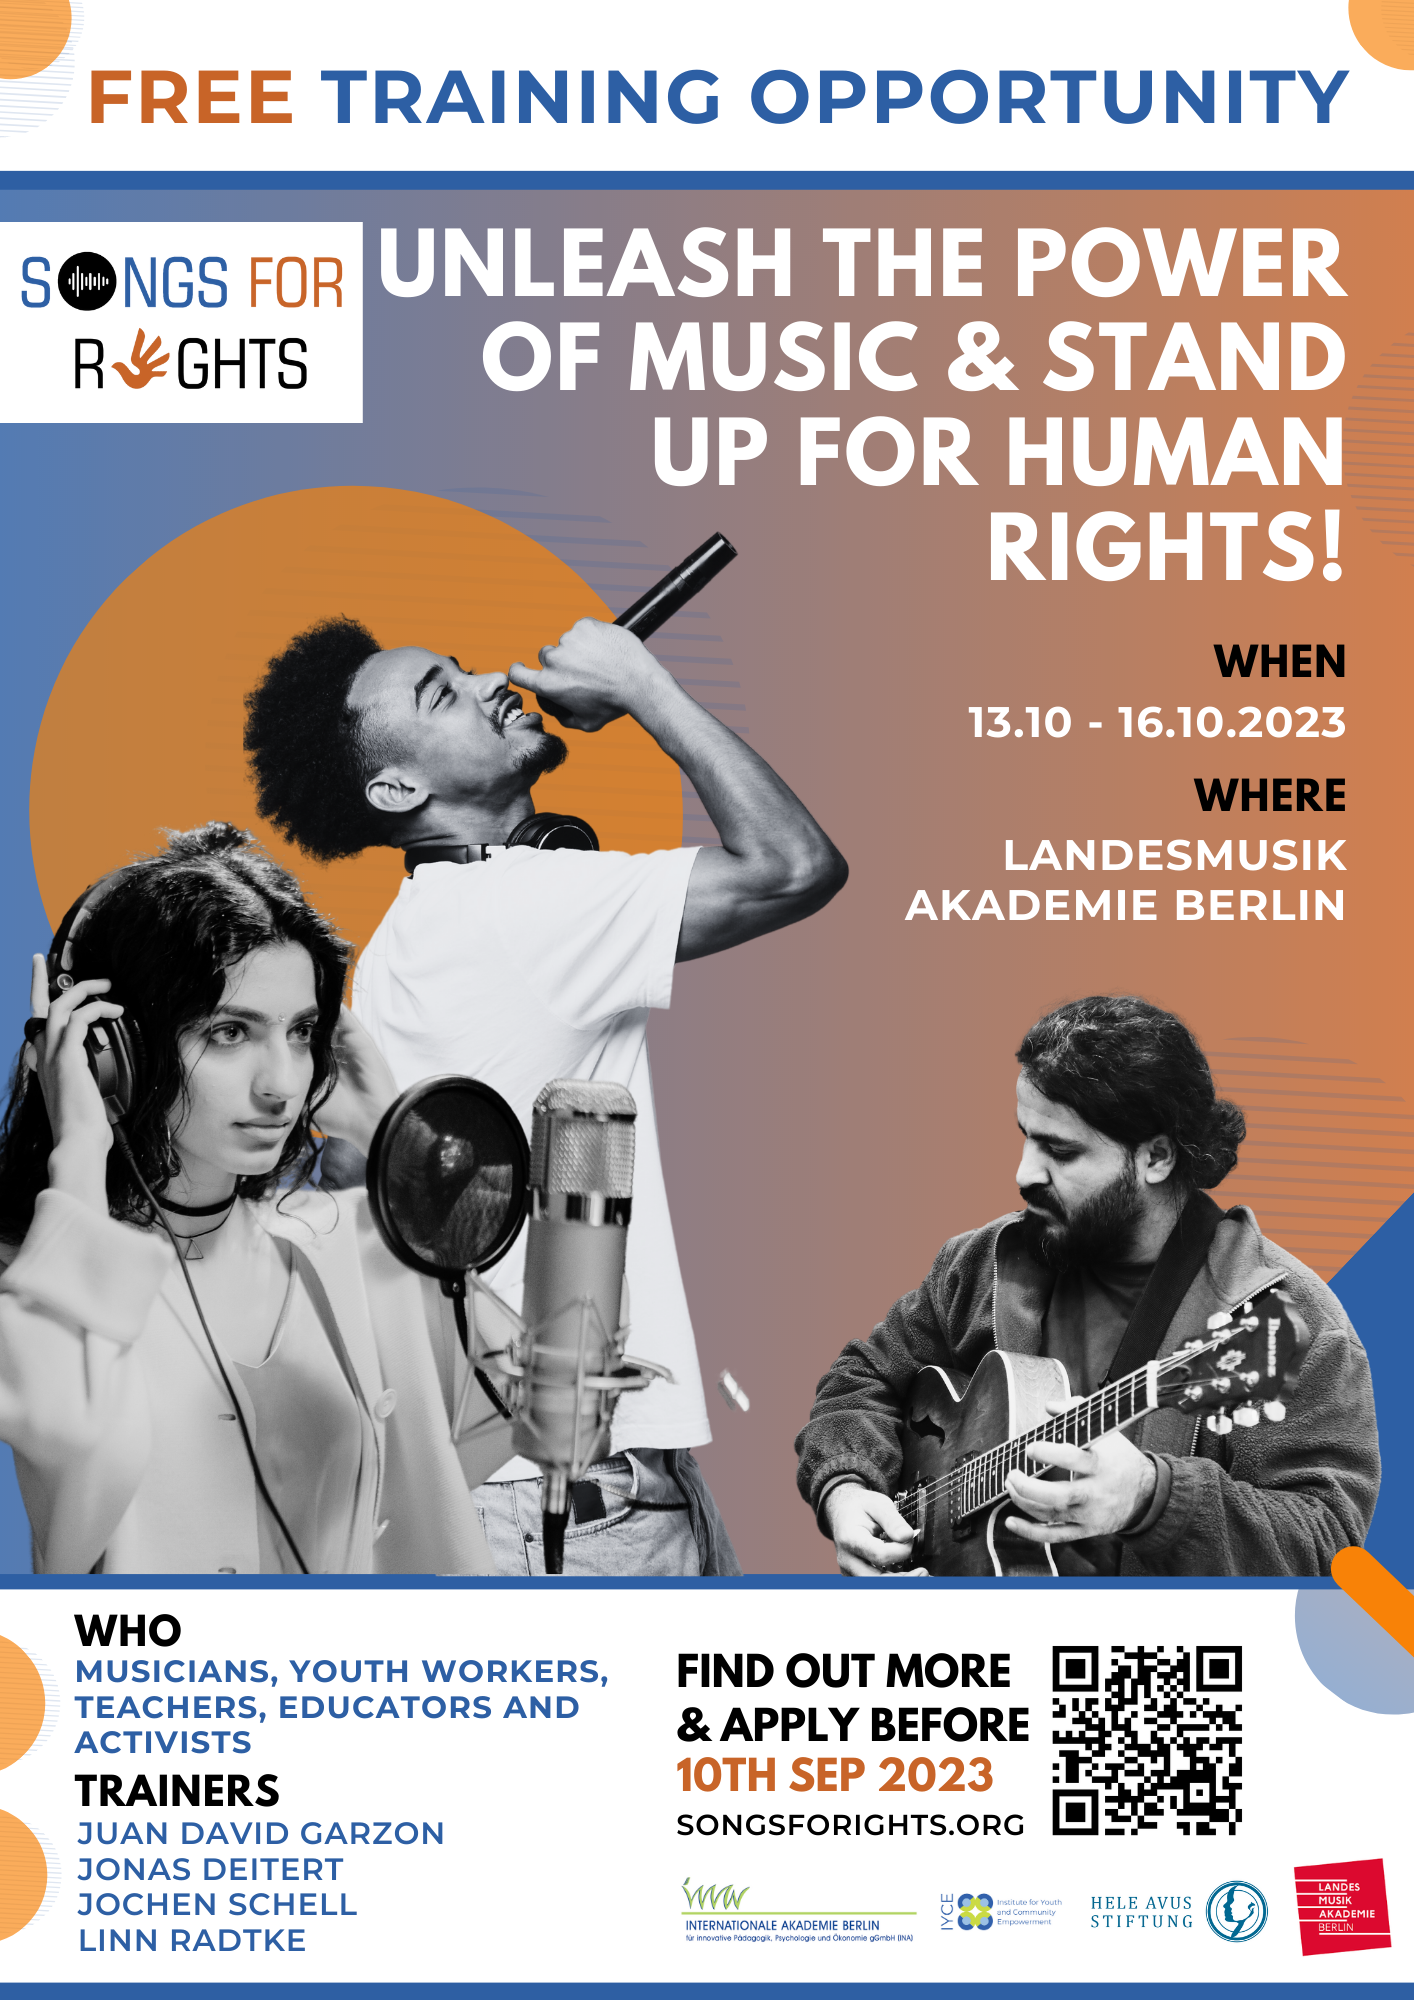 Songs for Rights Training Poster, Unleash the Power of Music and Stand Up for Human Rights. Application for Education.